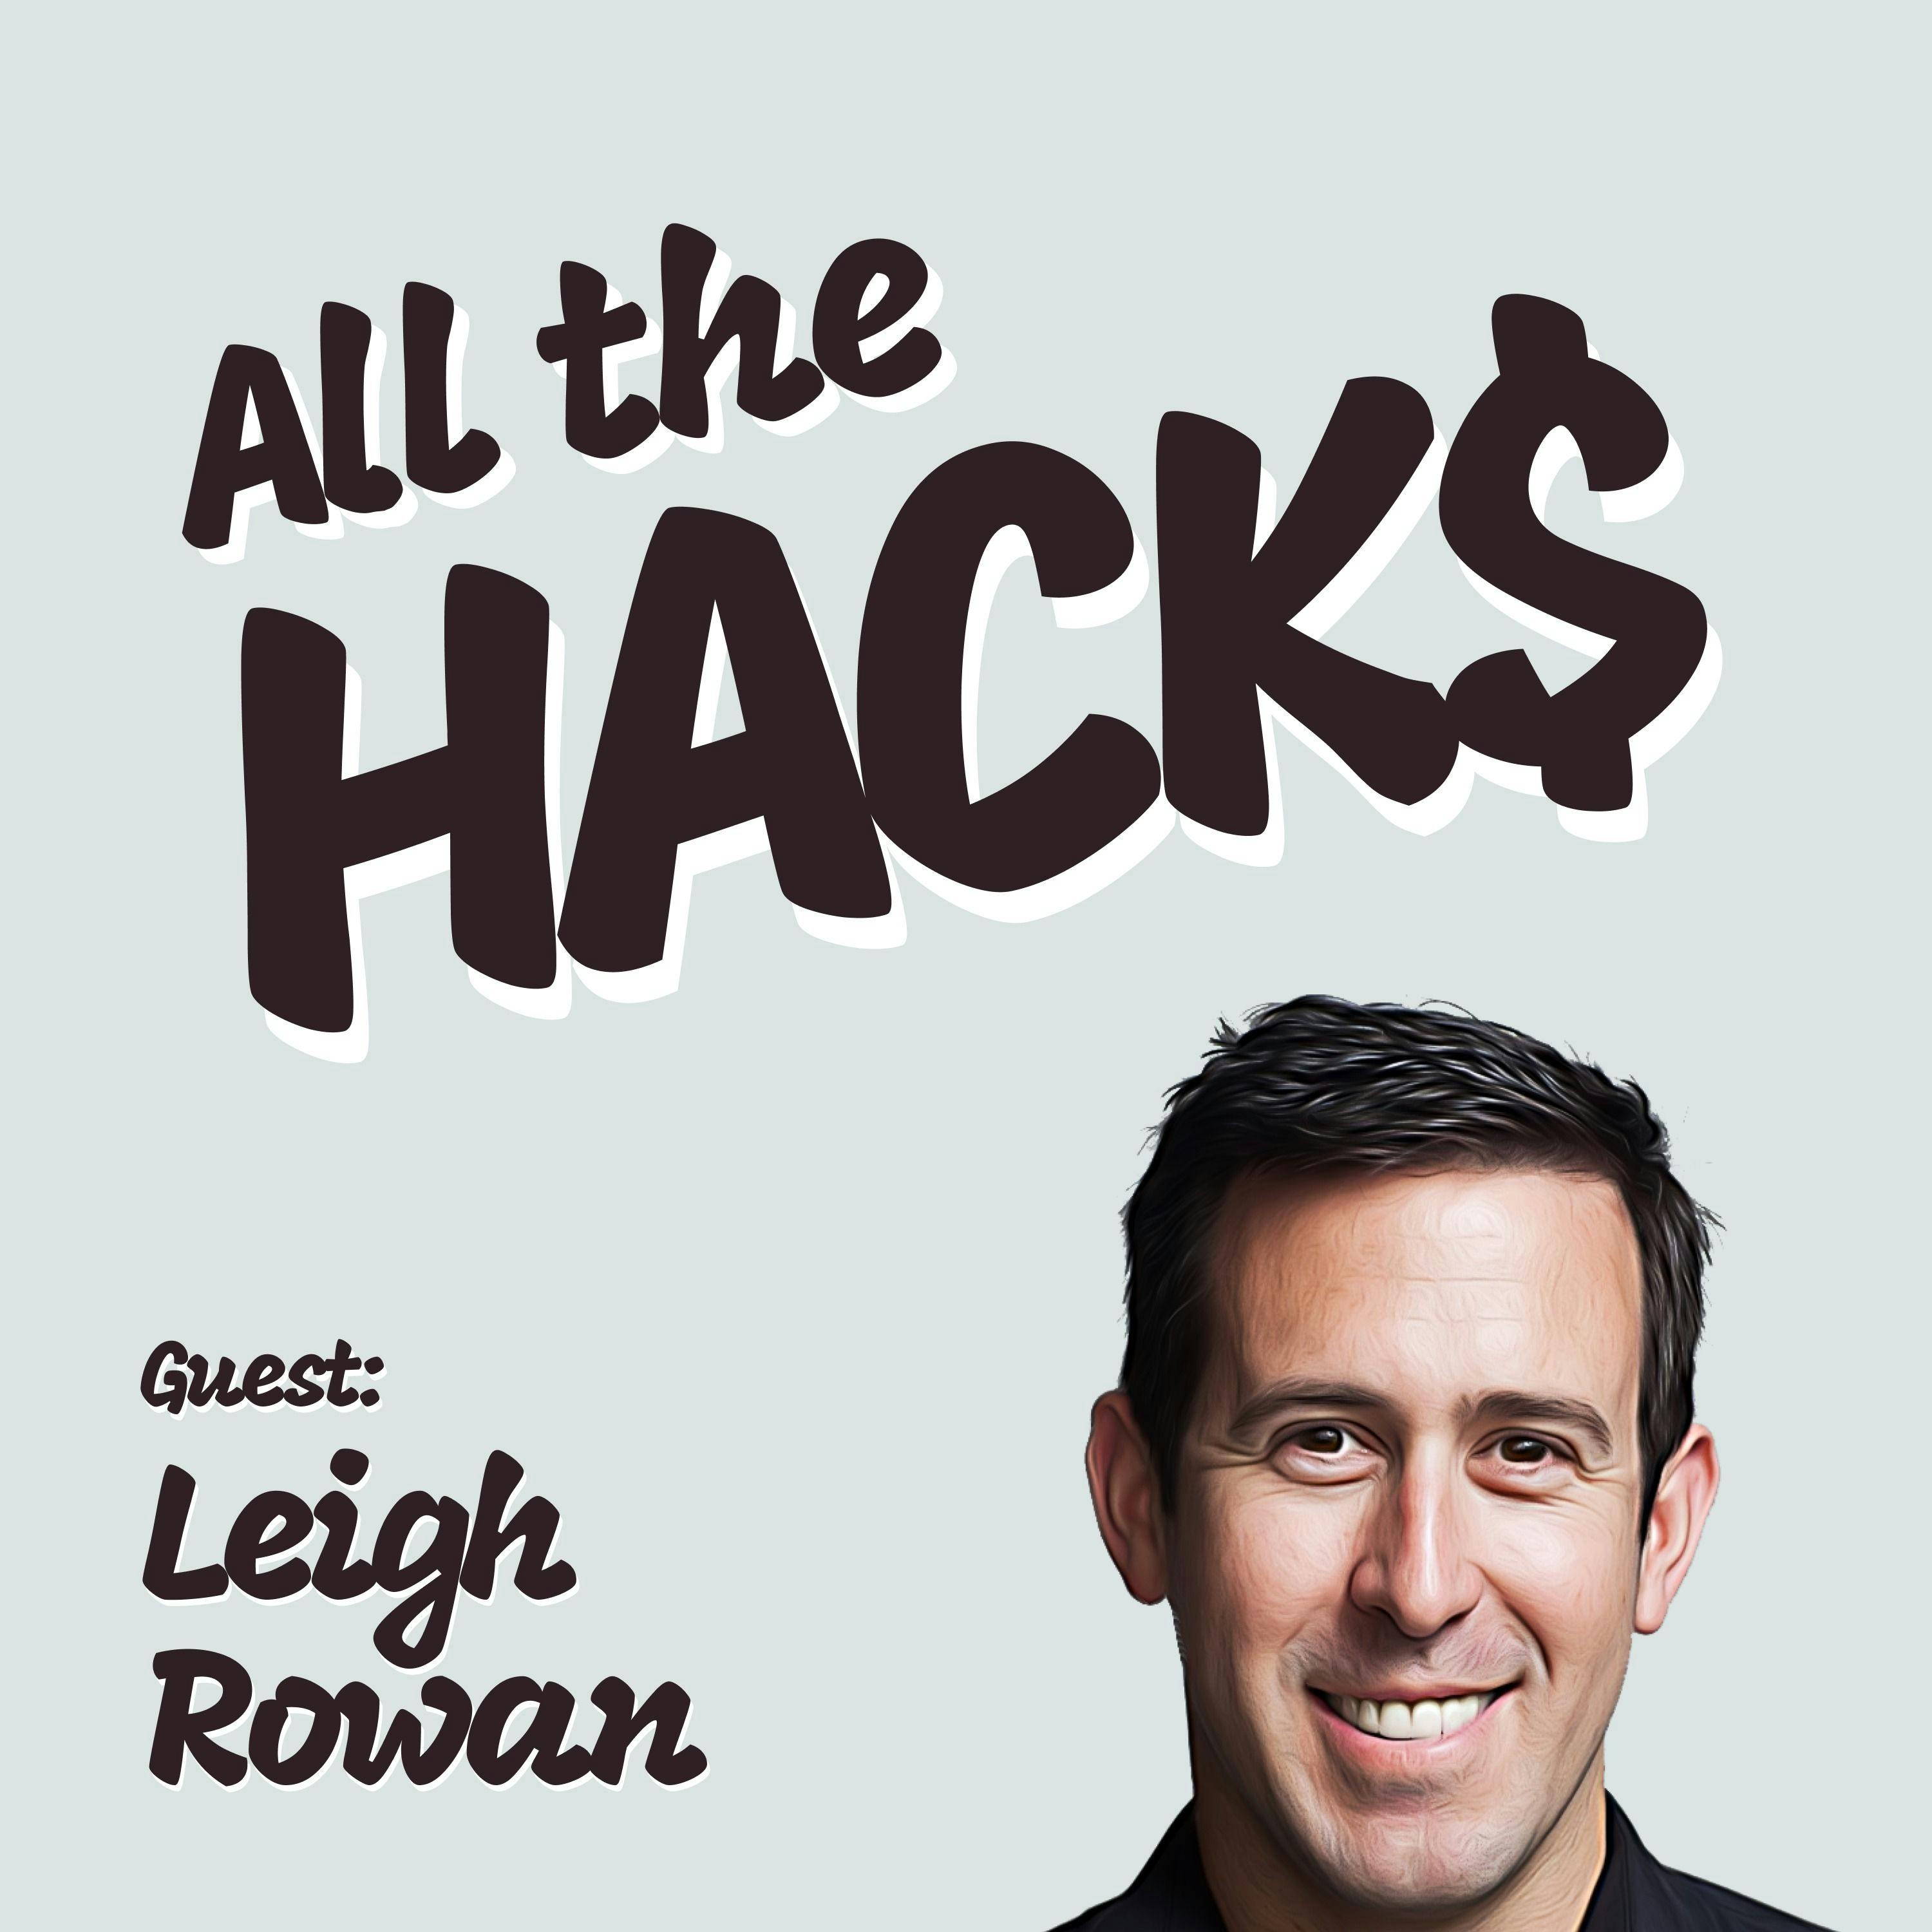 Travel Hacking the Lifestyles of the Rich and Famous with Leigh Rowan